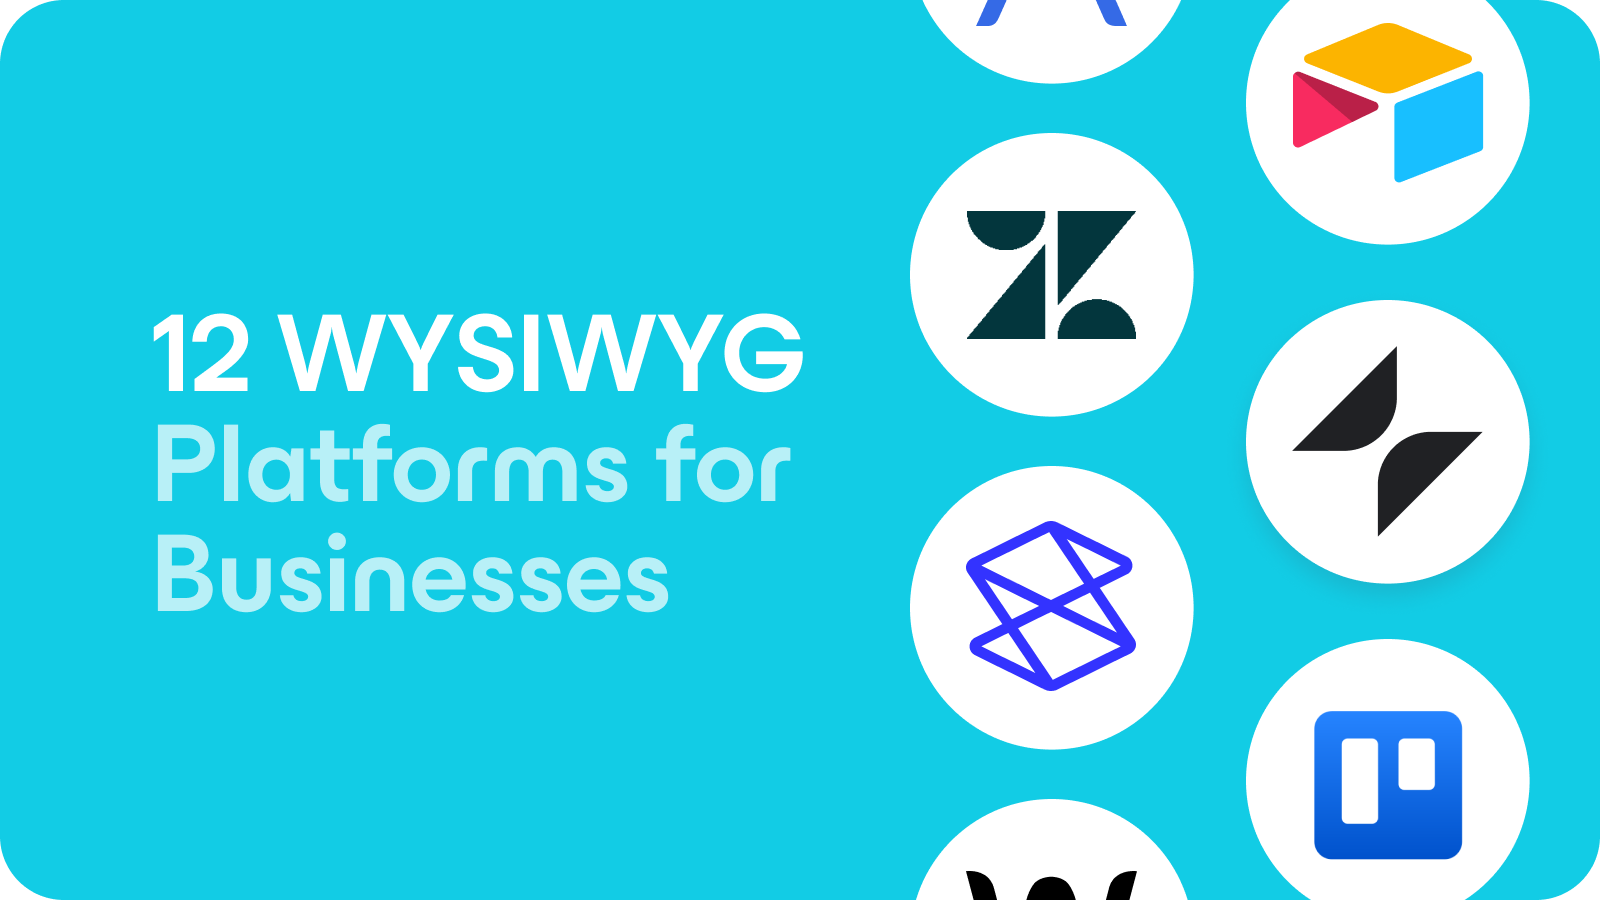 12 WYSIWYG Platforms for Businesses: Website Builders, Ecommerce Plugins, and More